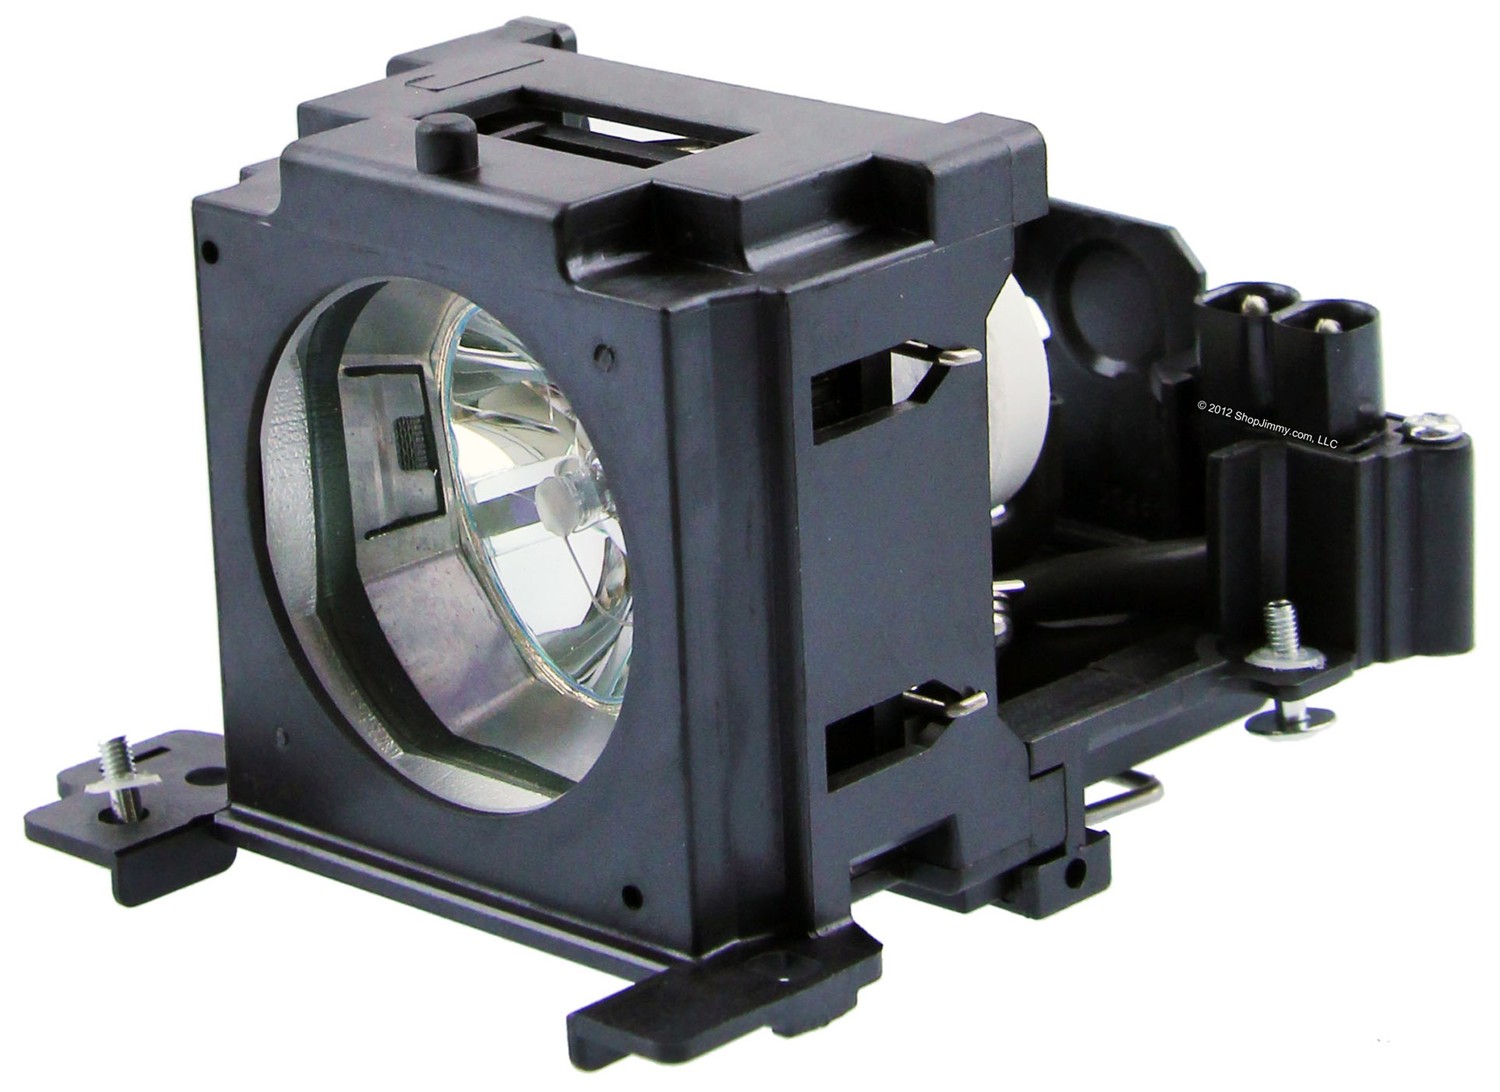 LKX62W 3M Projector Lamp Replacement. Projector Lamp Assembly with High Quality Genuine Original Philips UHP Bulb Inside